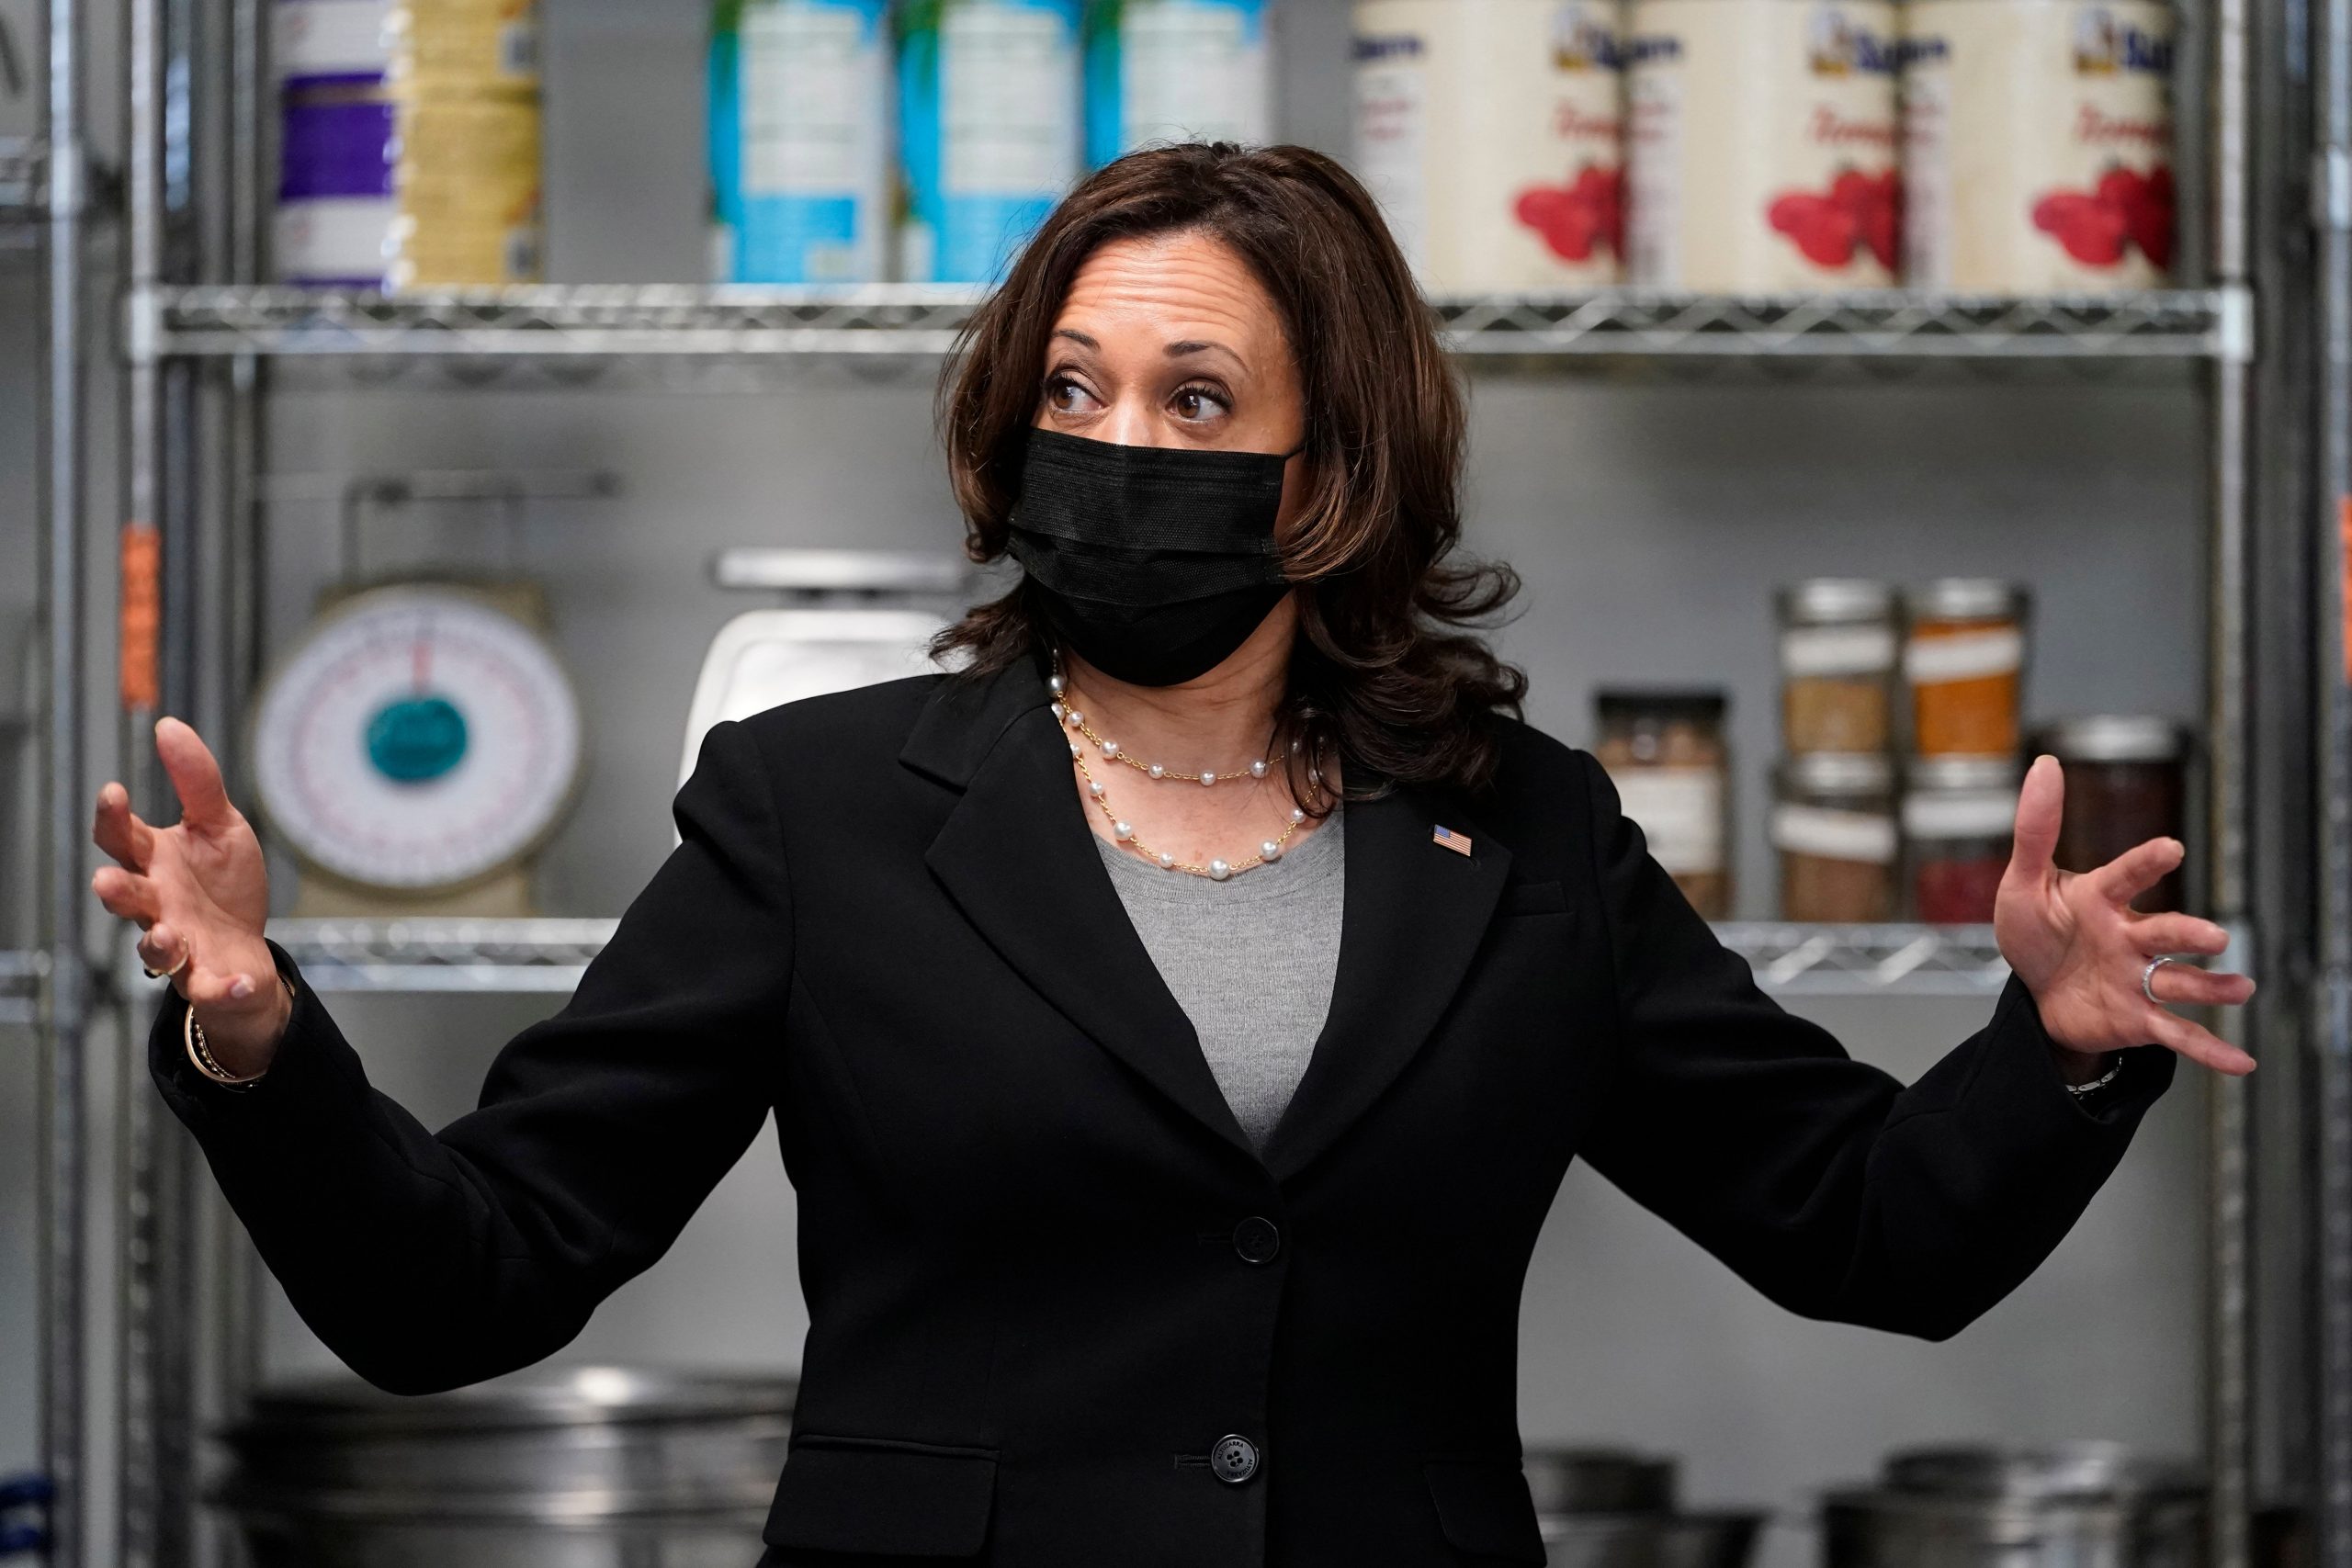 ‘Kamala Harris you are going to die’: US nurse threatens to kill Vice President, arrested